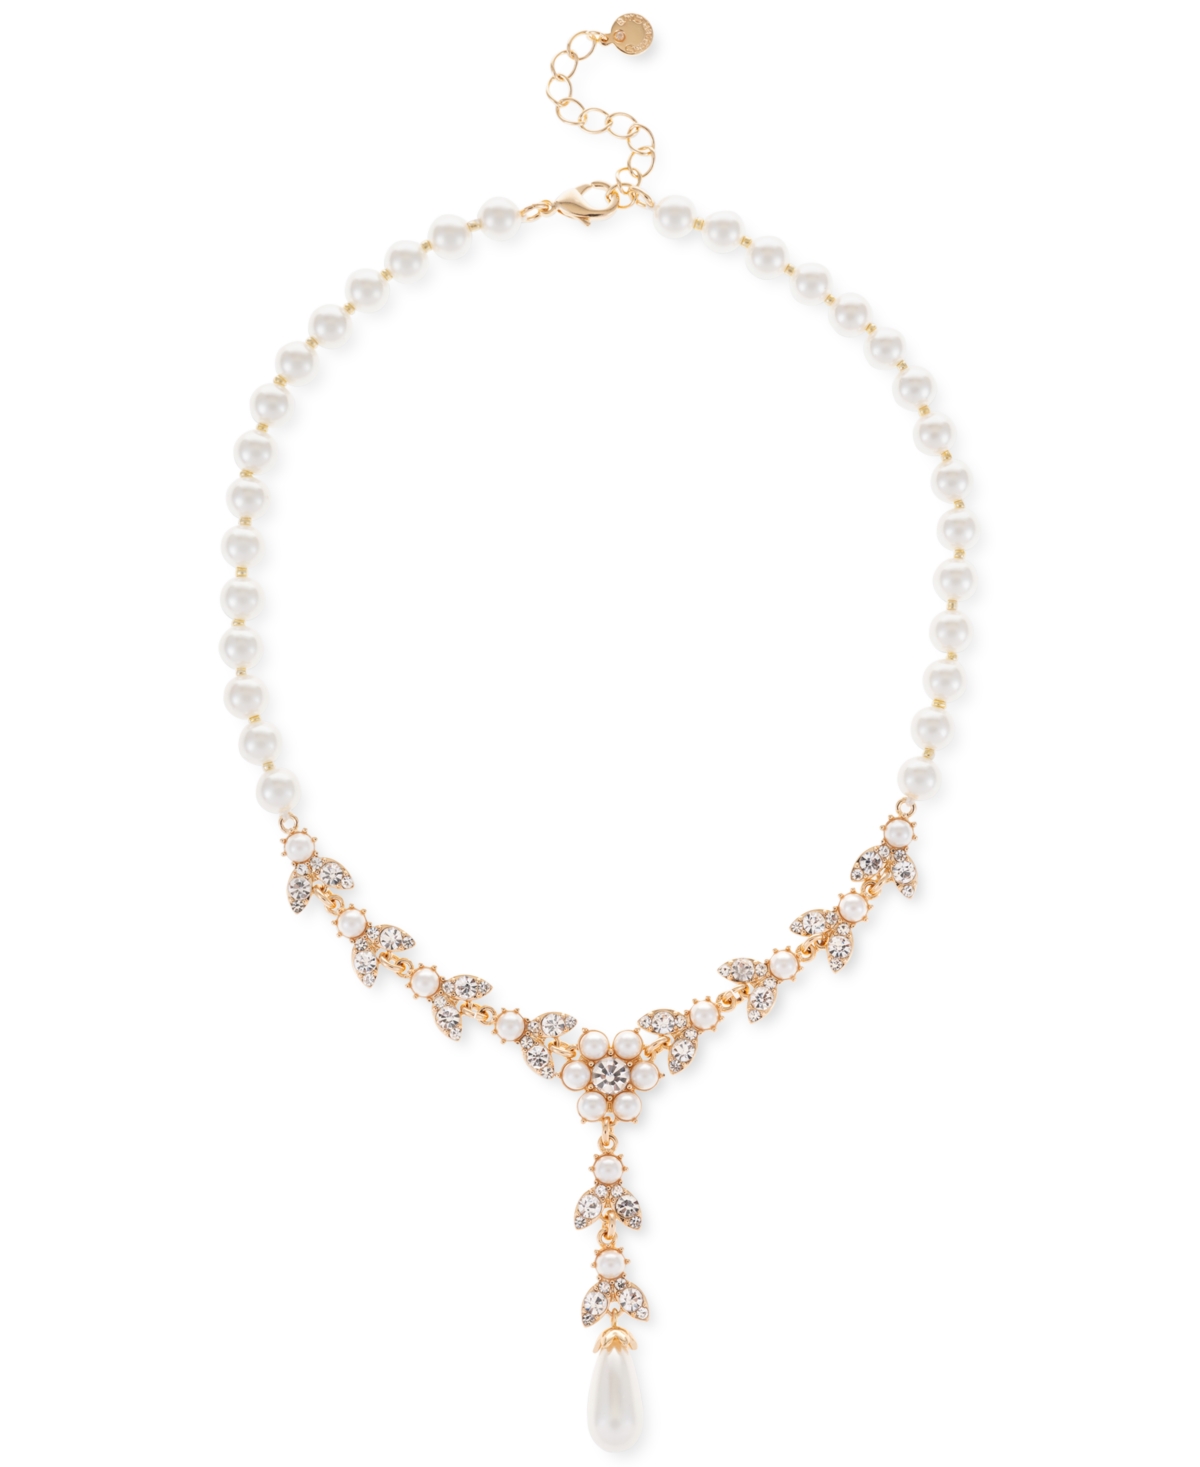 Gold-Tone Crystal & Imitation Pearl Flower Lariat Necklace, 17" + 2" extender, Created for Macy's - White